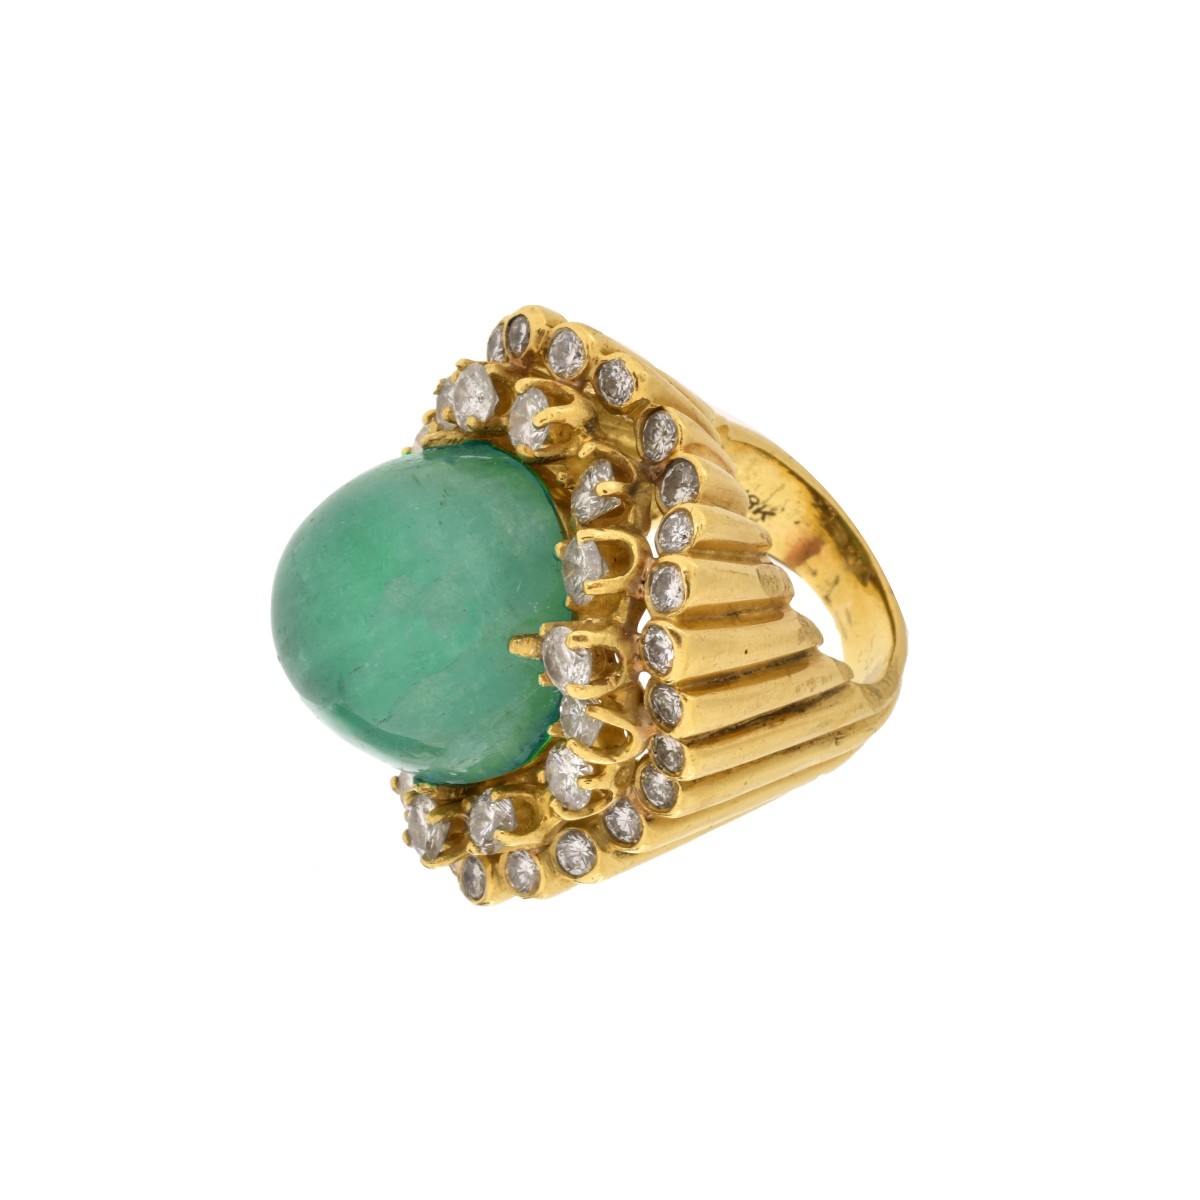 Emerald, Diamond and 18K Ring | Kodner Auctions